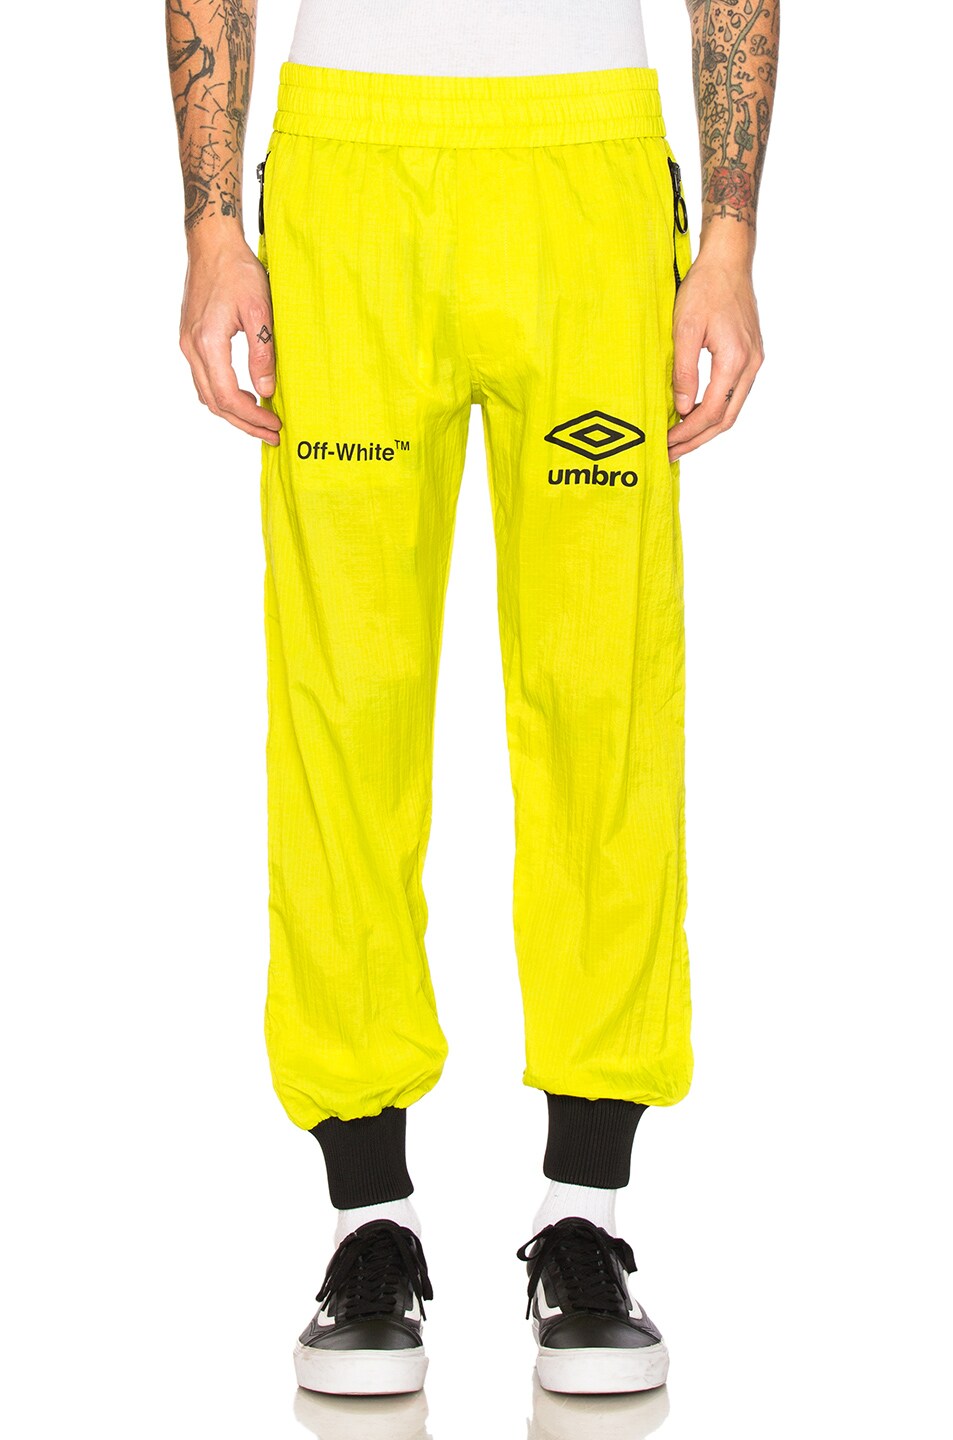 Image 1 of OFF-WHITE x Umbro Ripstop Pants in Brilliant Green & White